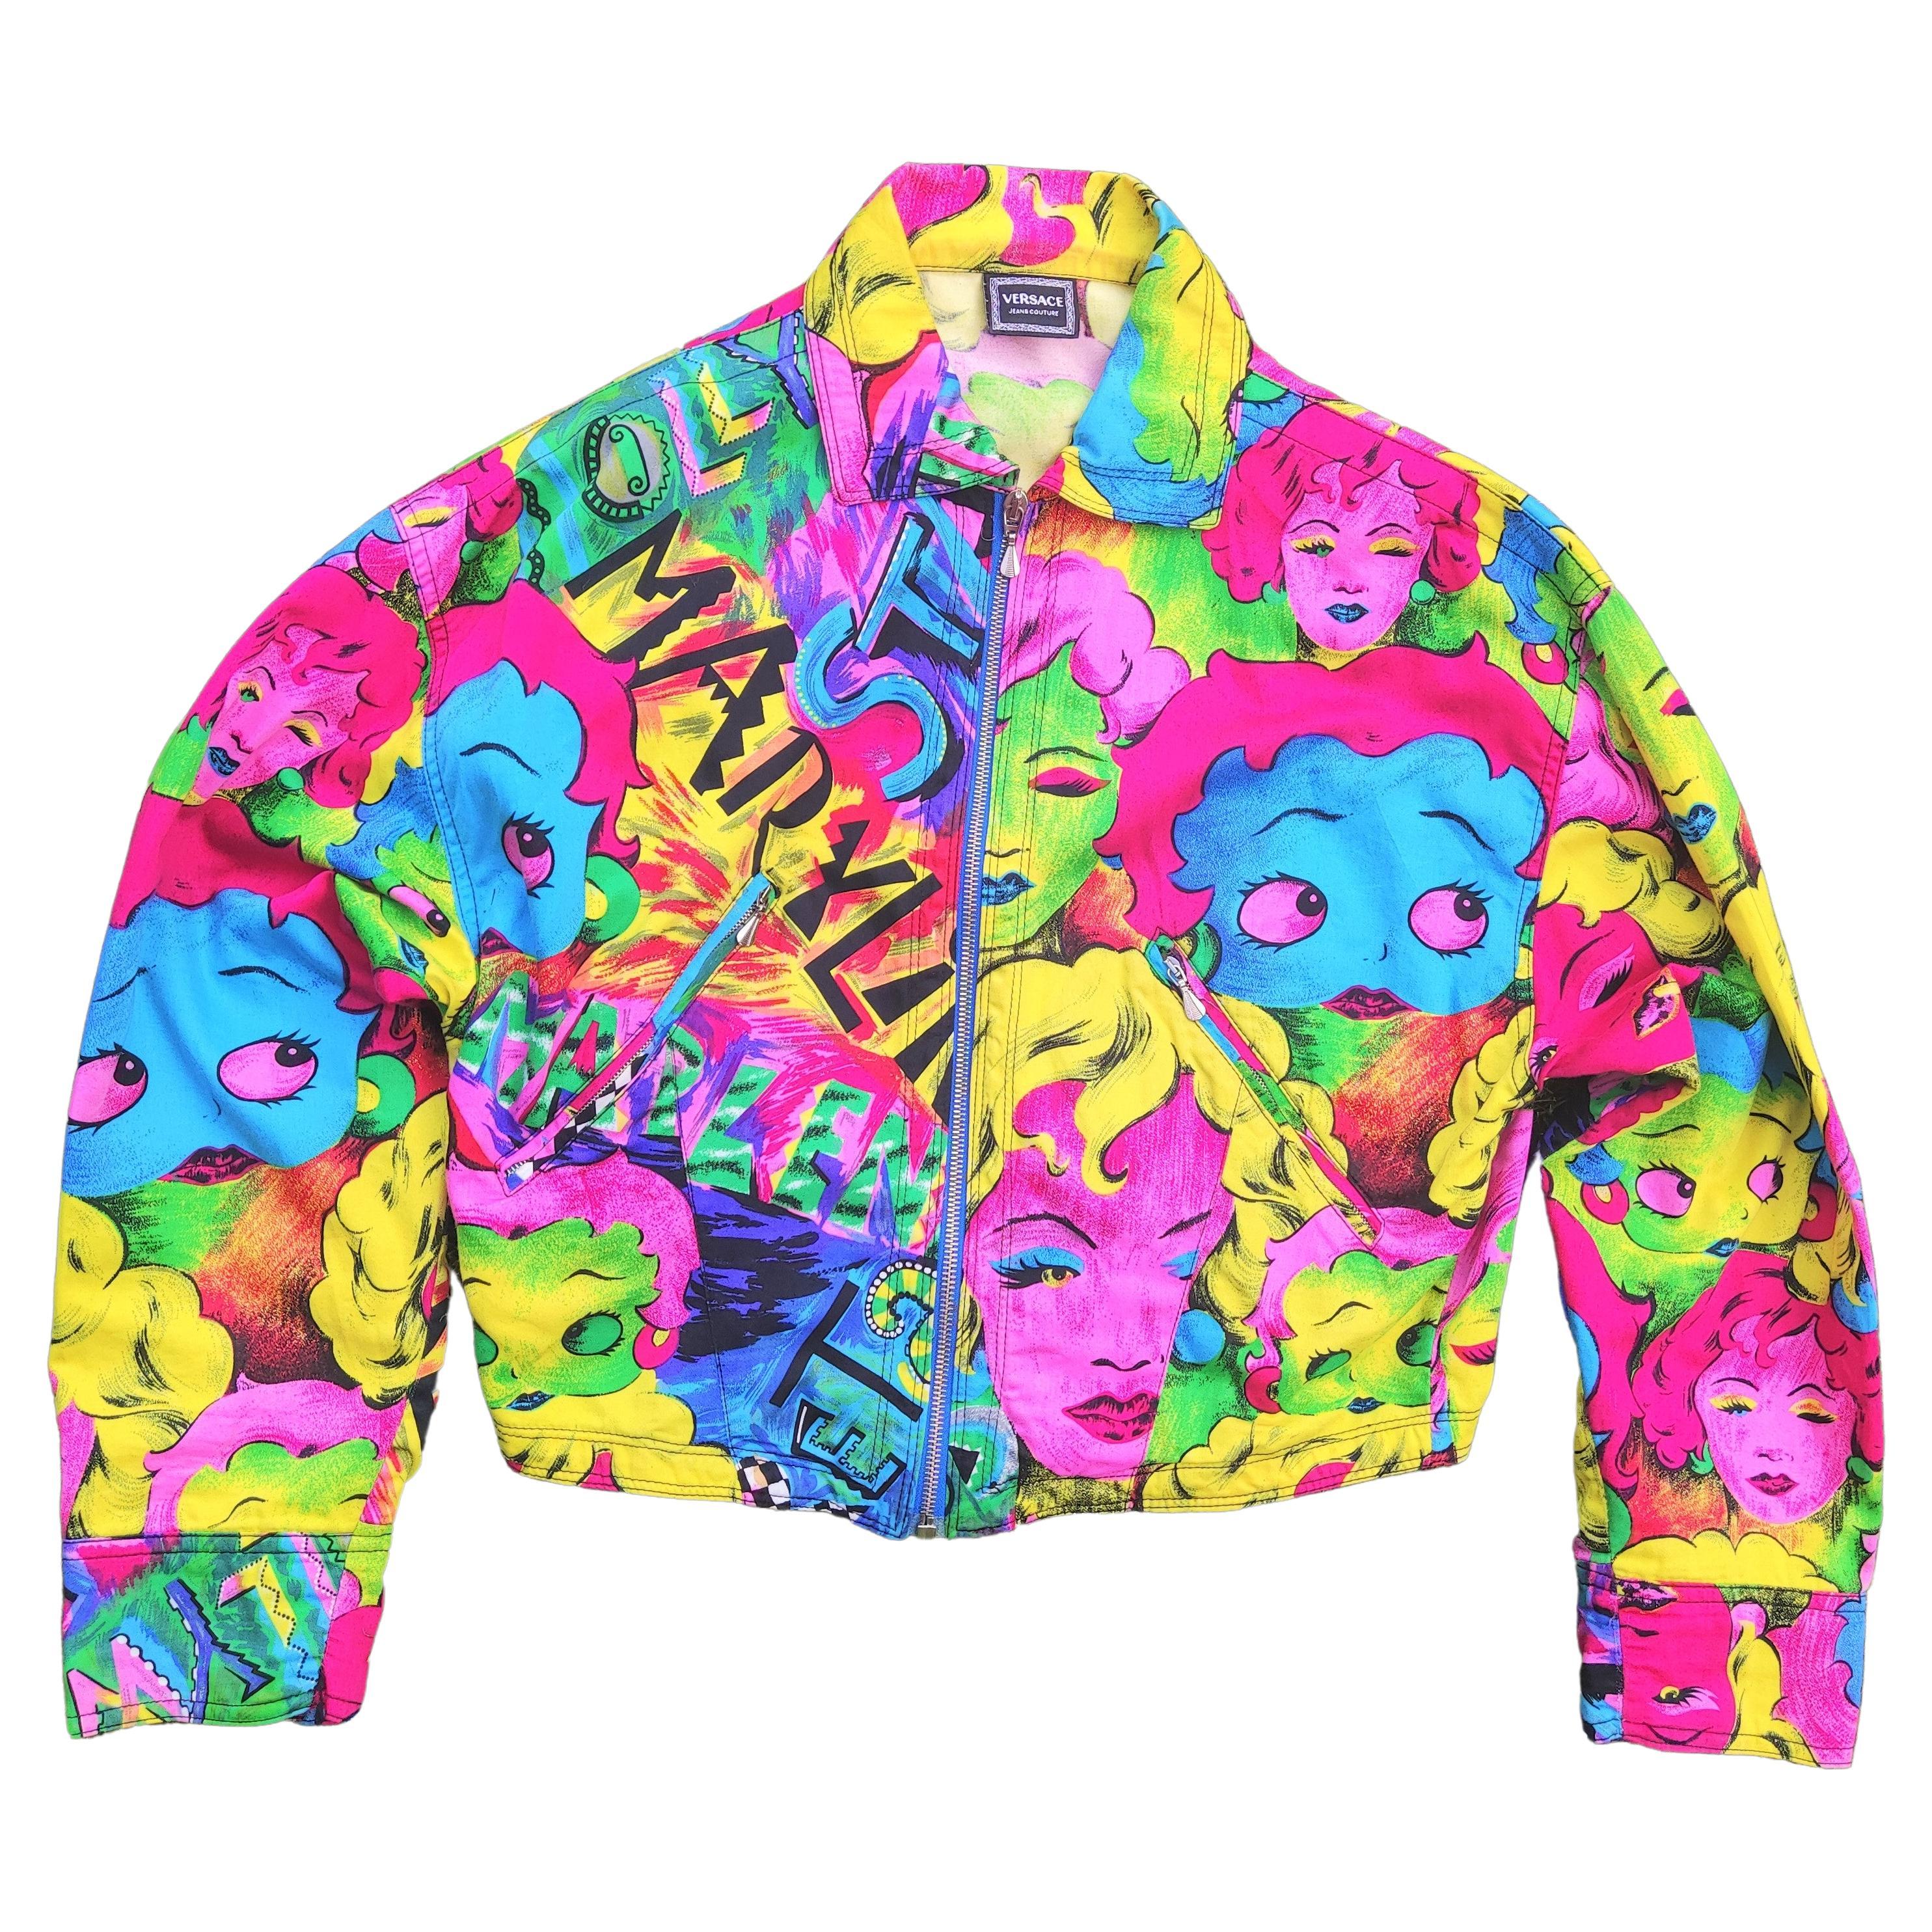 Gianni Versace Jeans Couture Marilyn Monroe Betty Boop Pop Art  Jacket , SS 1991